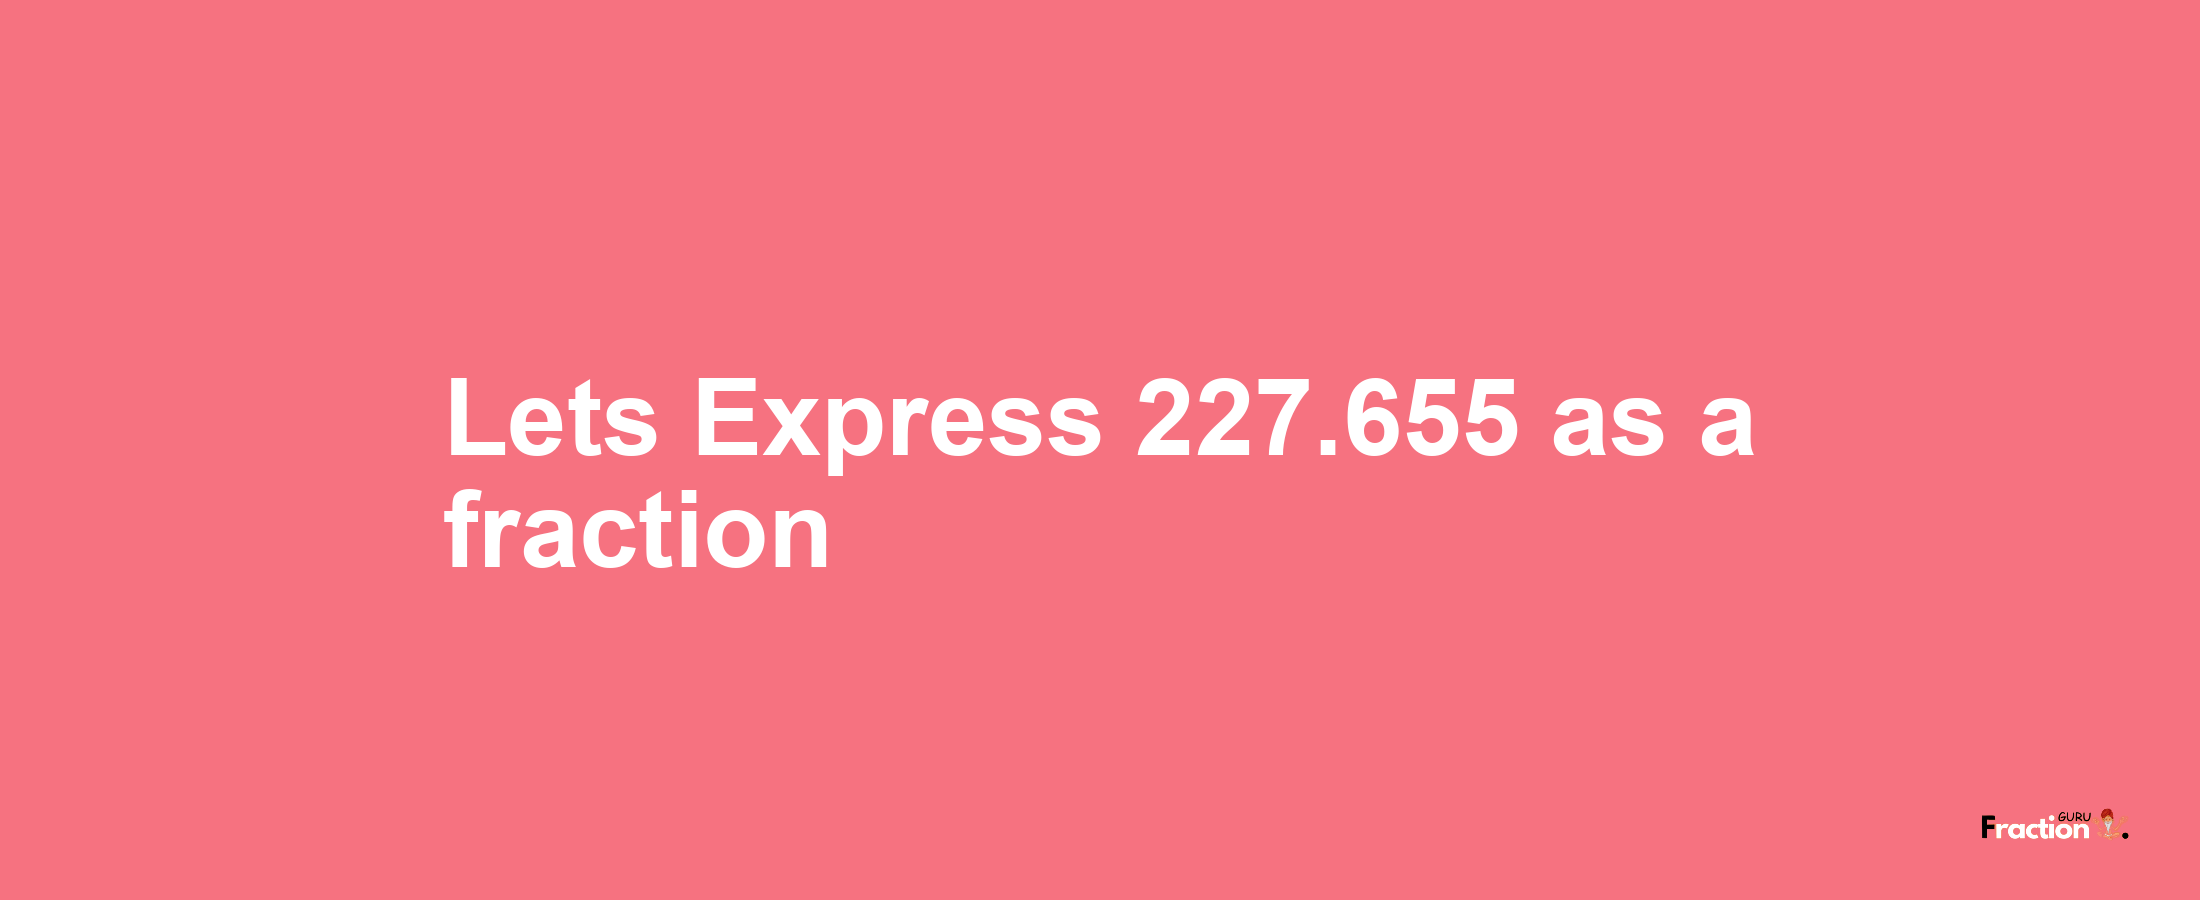 Lets Express 227.655 as afraction